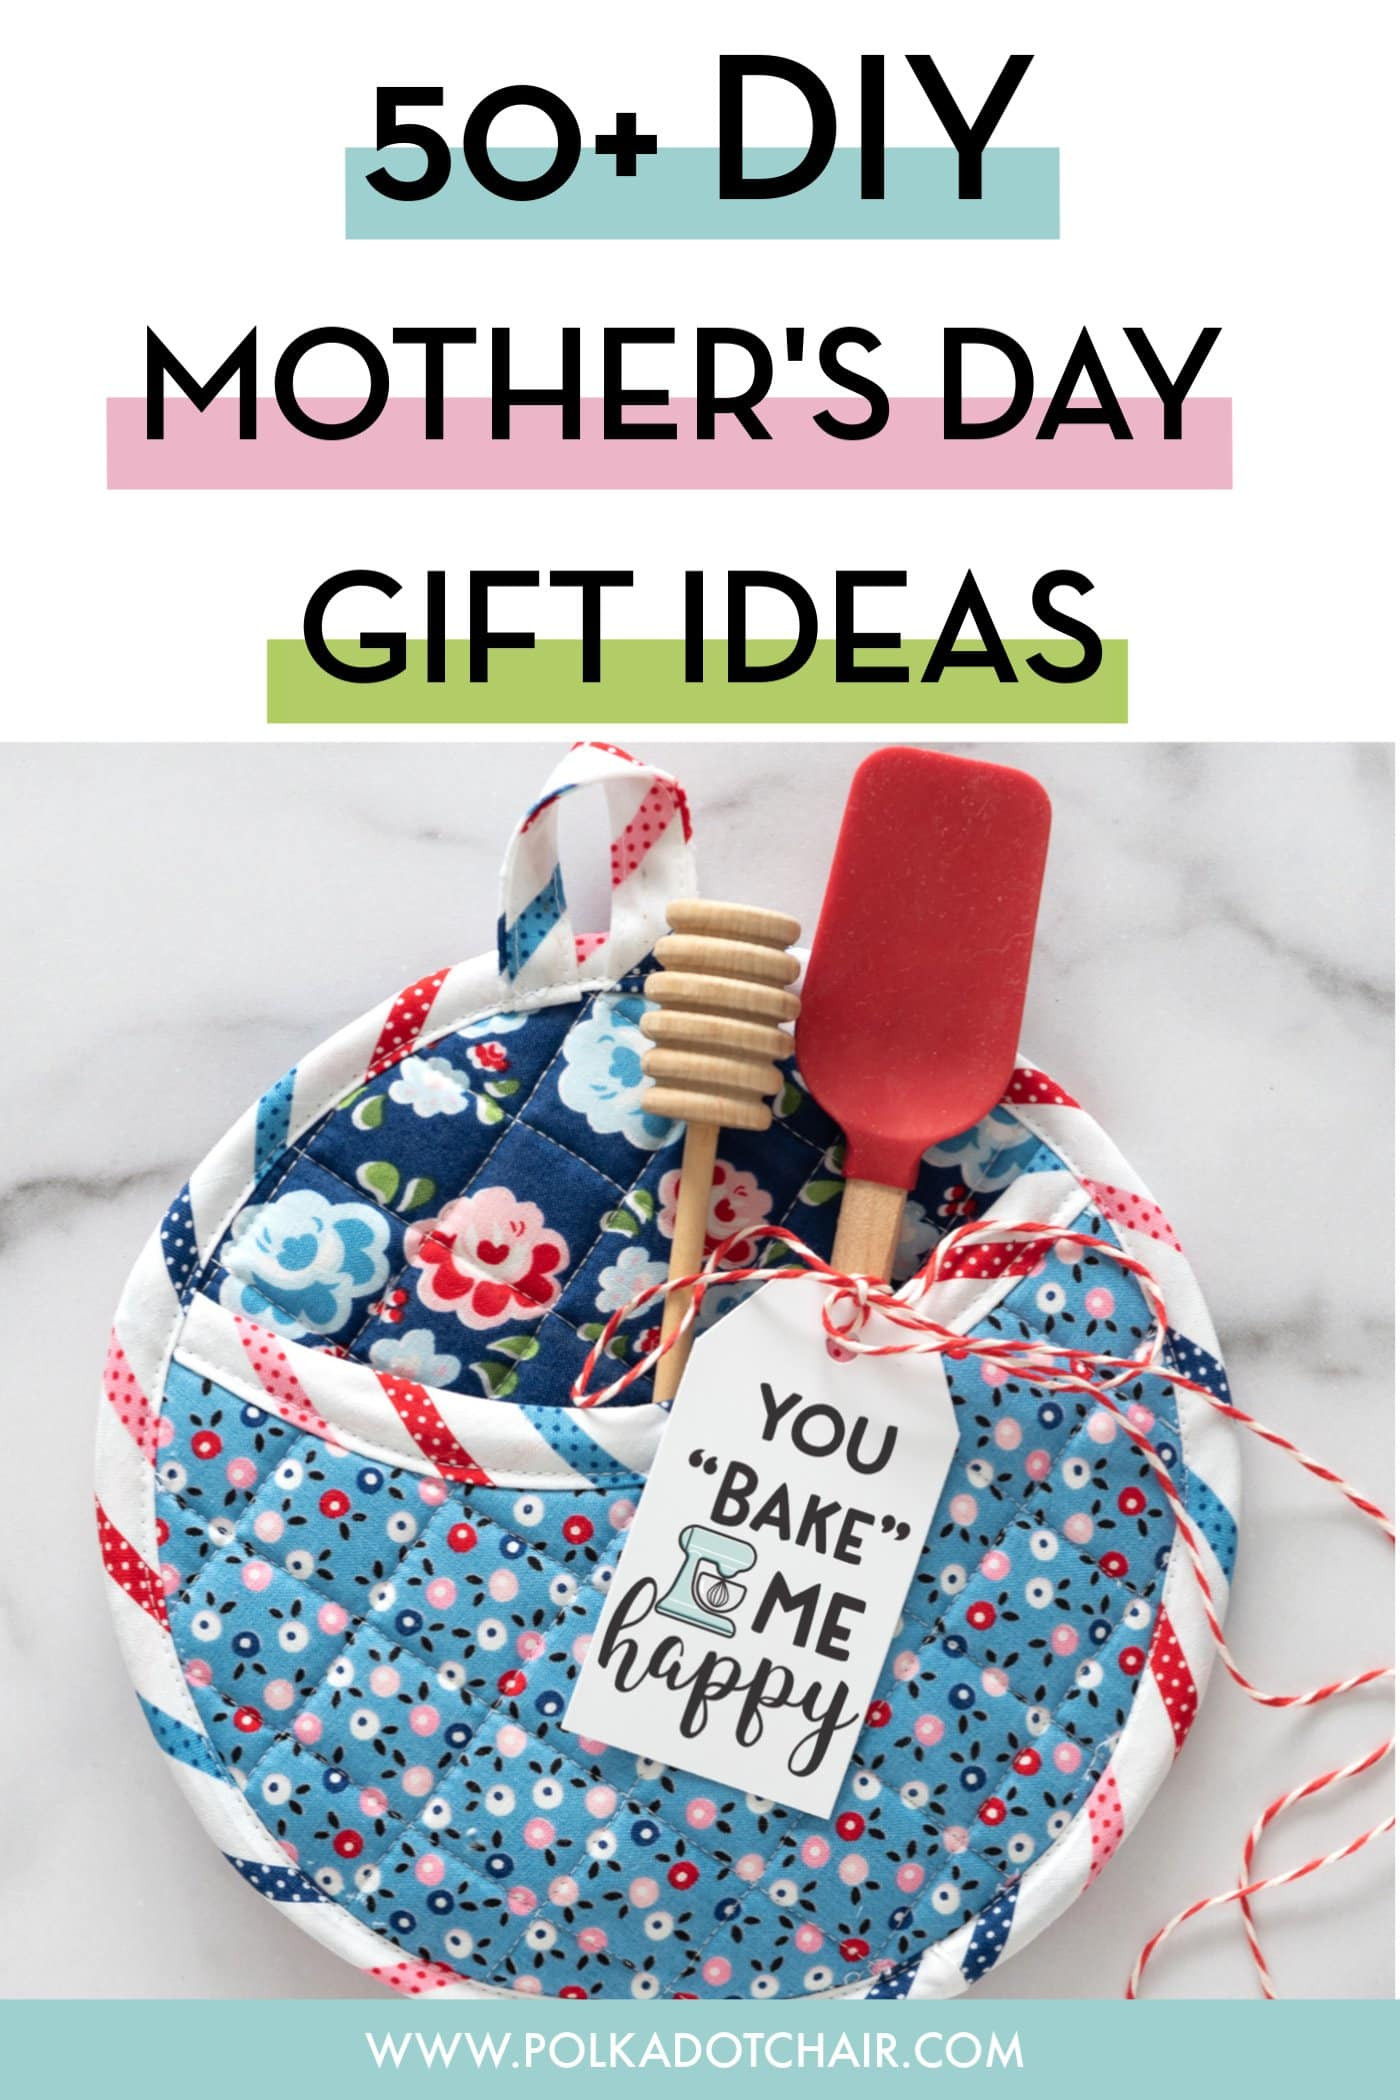 Mothers Da Gift Ideas
 50 DIY Mother s Day Gift Ideas & Projects